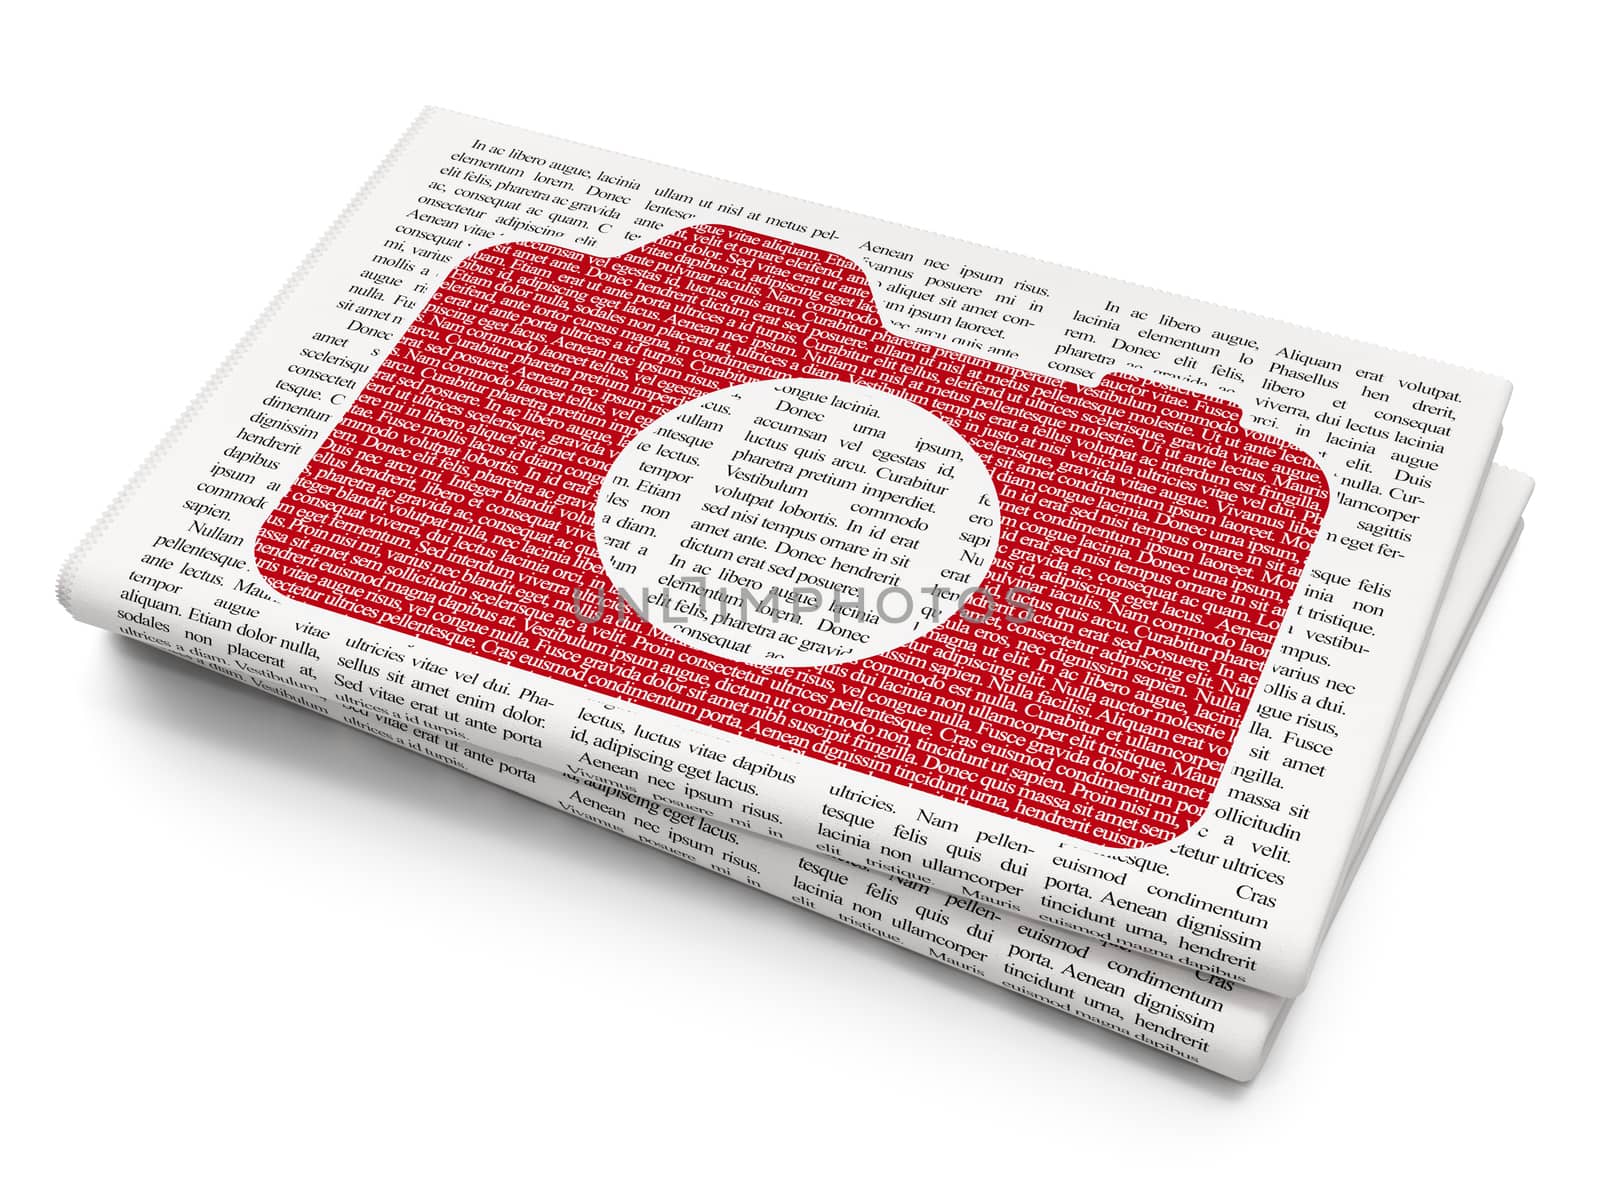 Vacation concept: Pixelated red Photo Camera icon on Newspaper background, 3D rendering